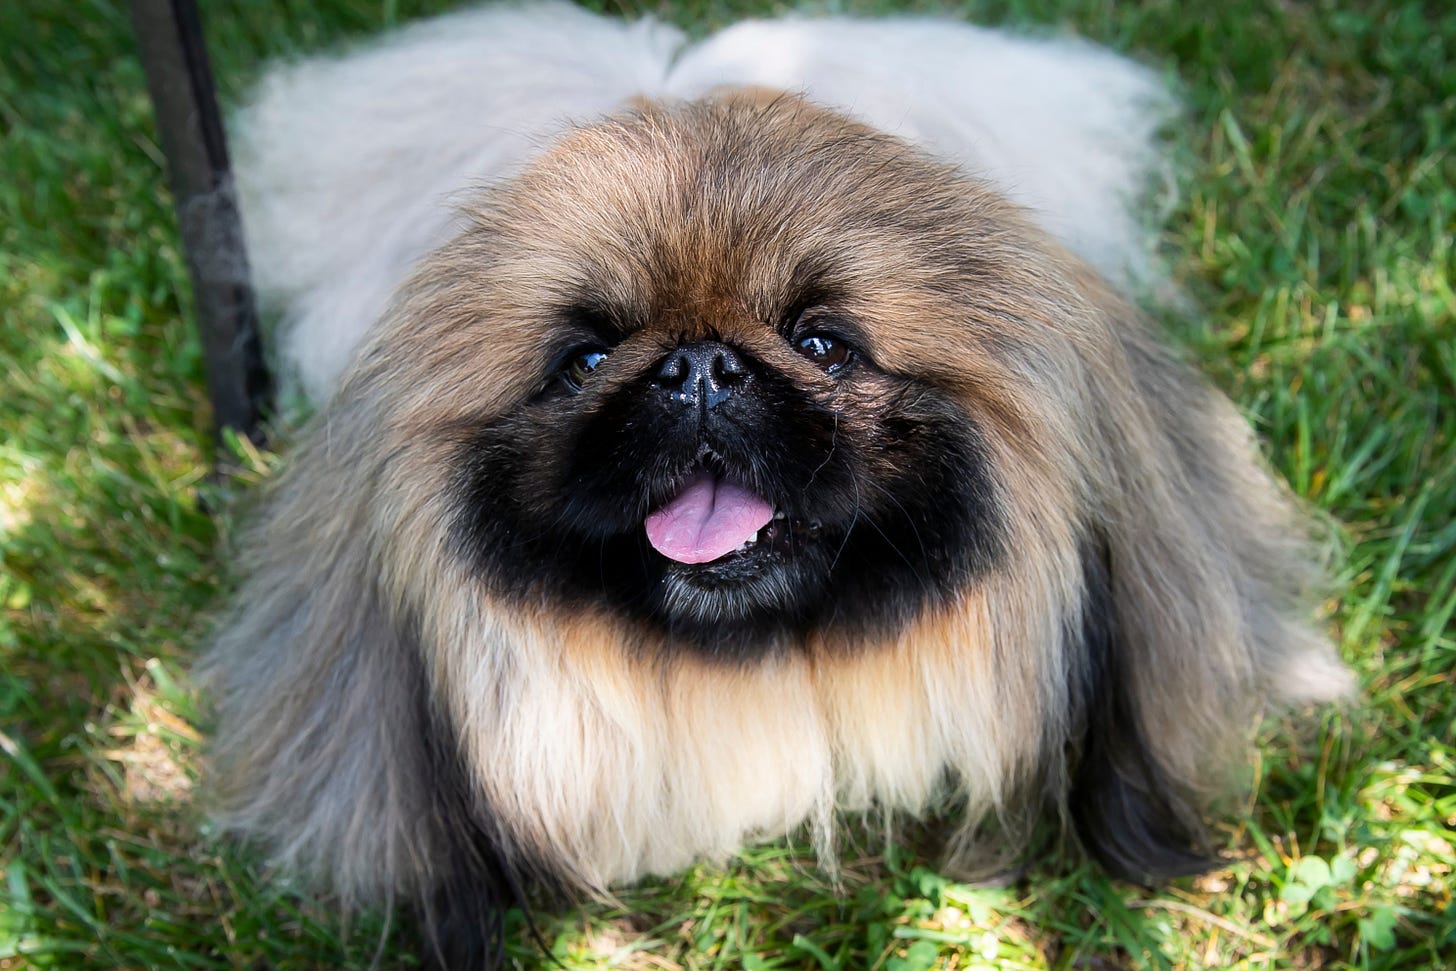 Wasabi of East Berlin, Pa.: Getting to know Westminster dog show winner